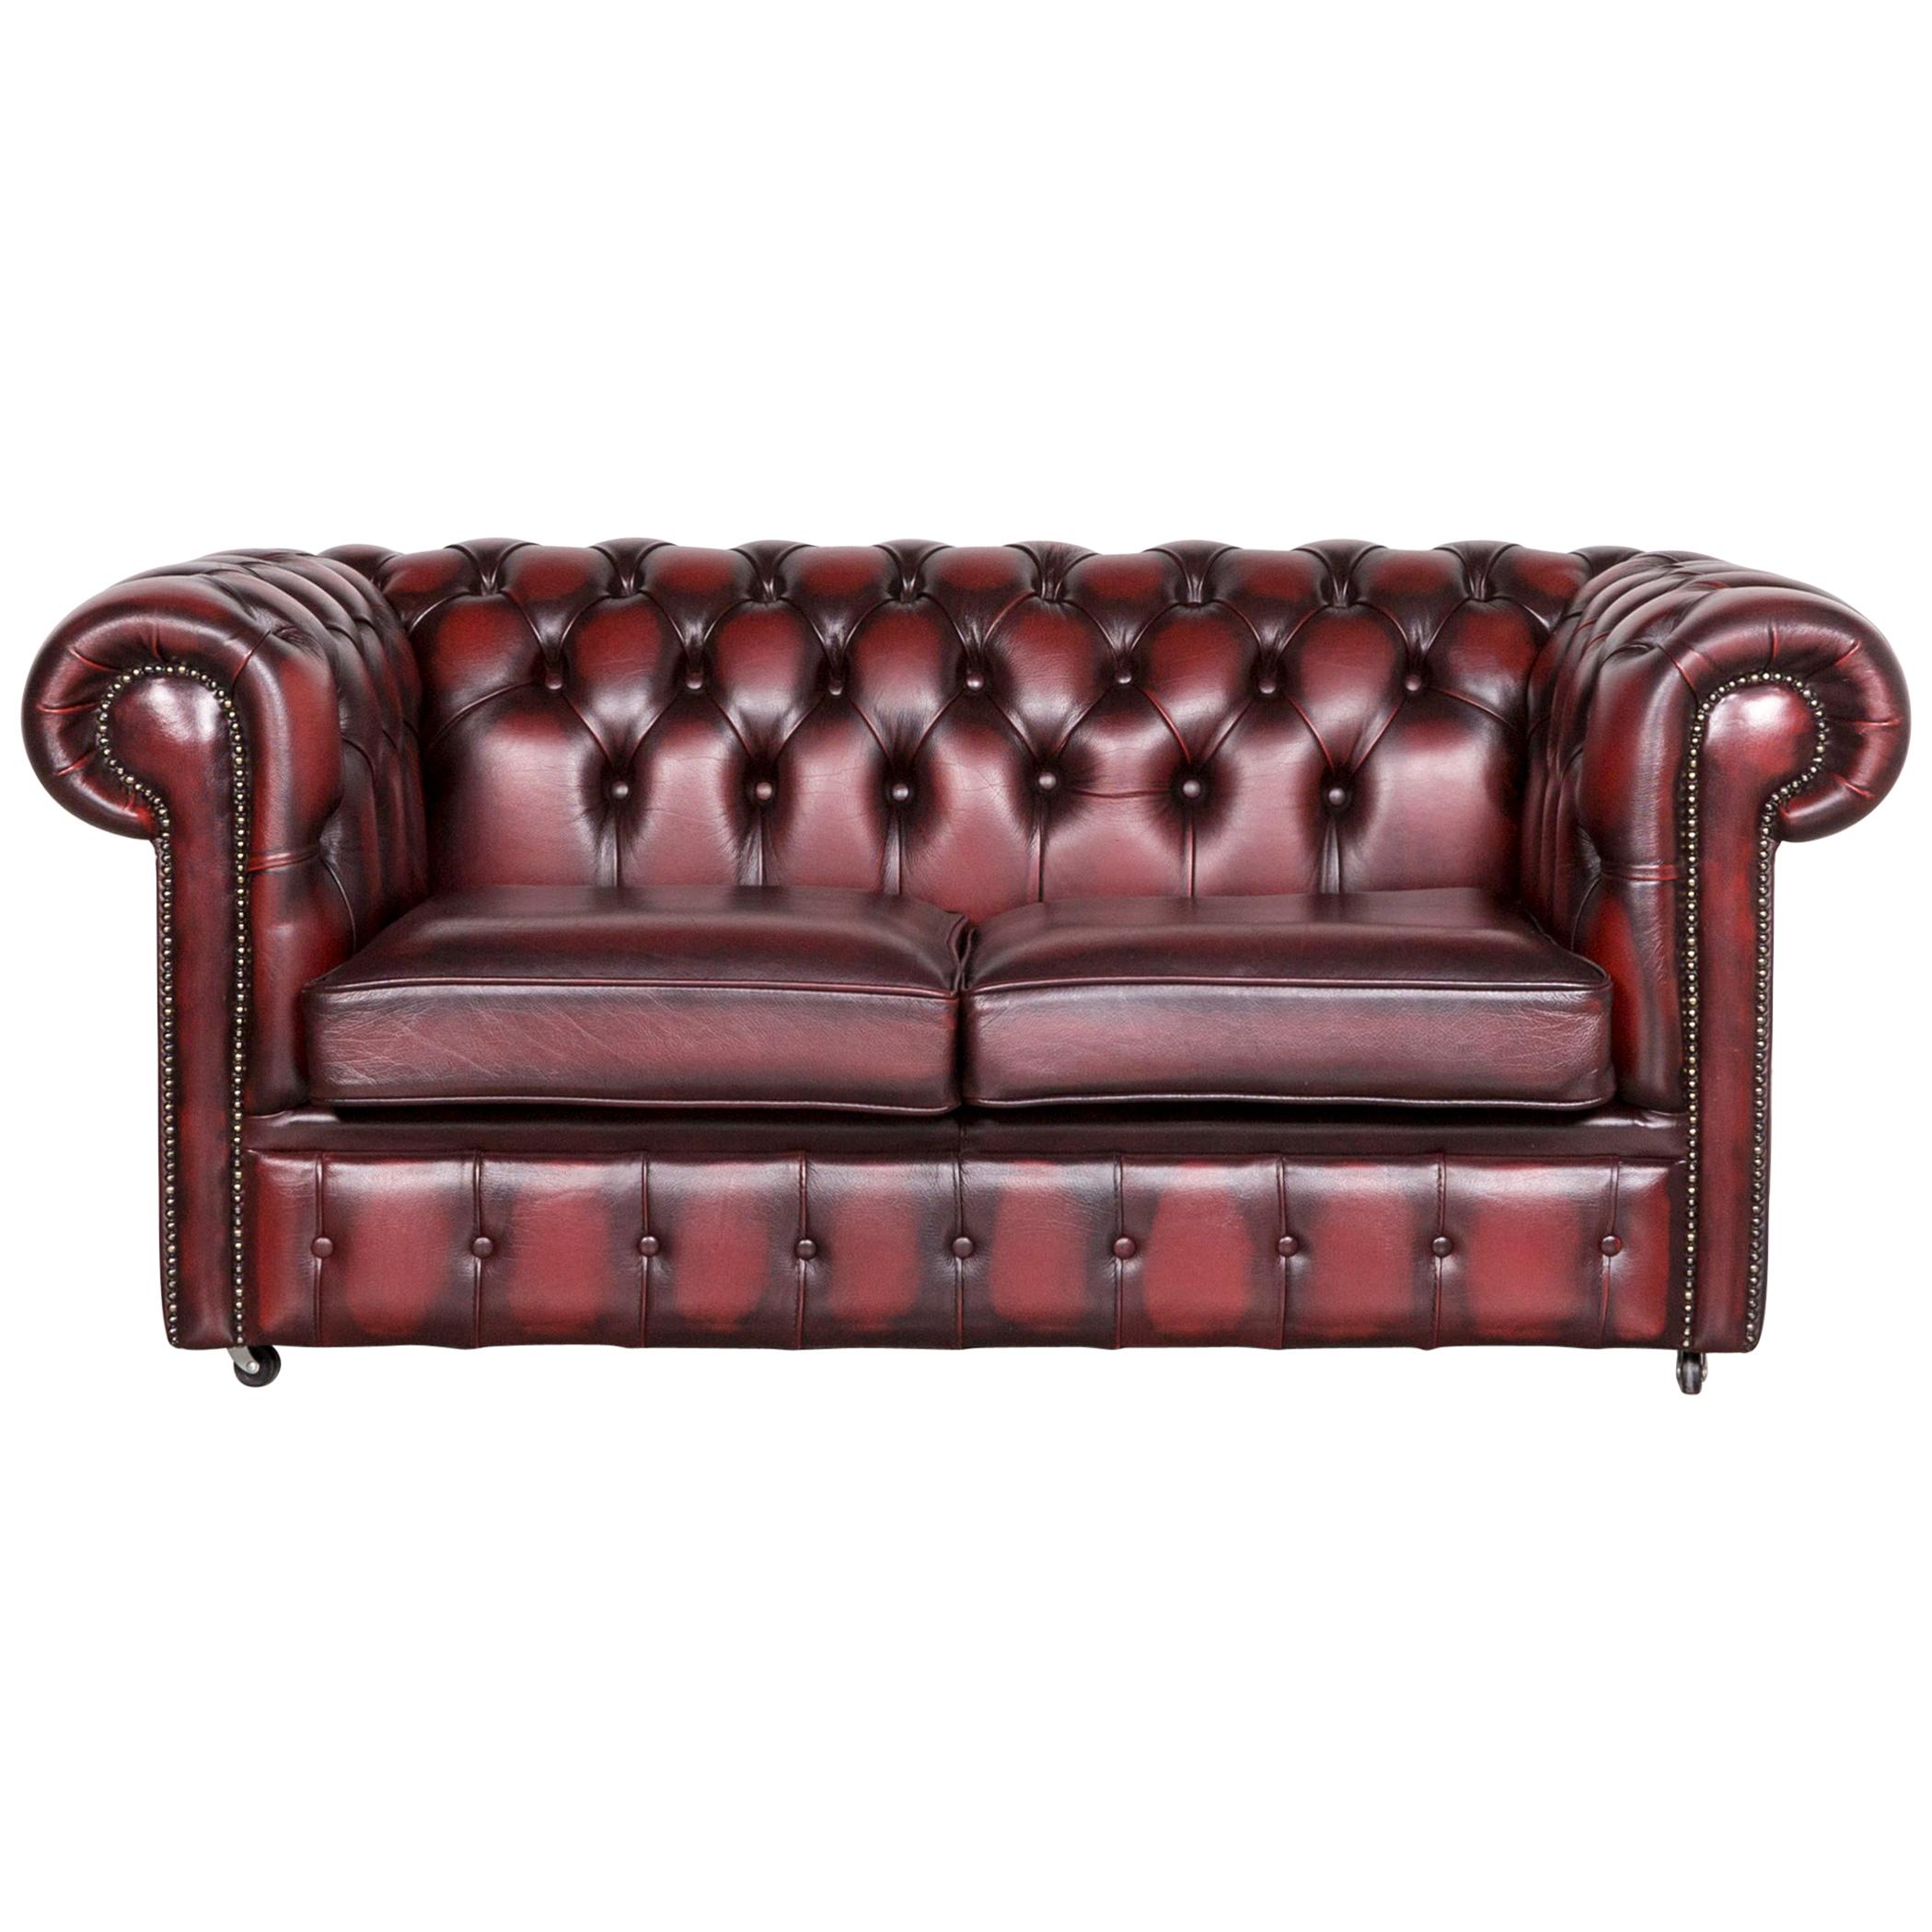 Chesterfield Leather Sofa Red Two-Seat Vintage Couch